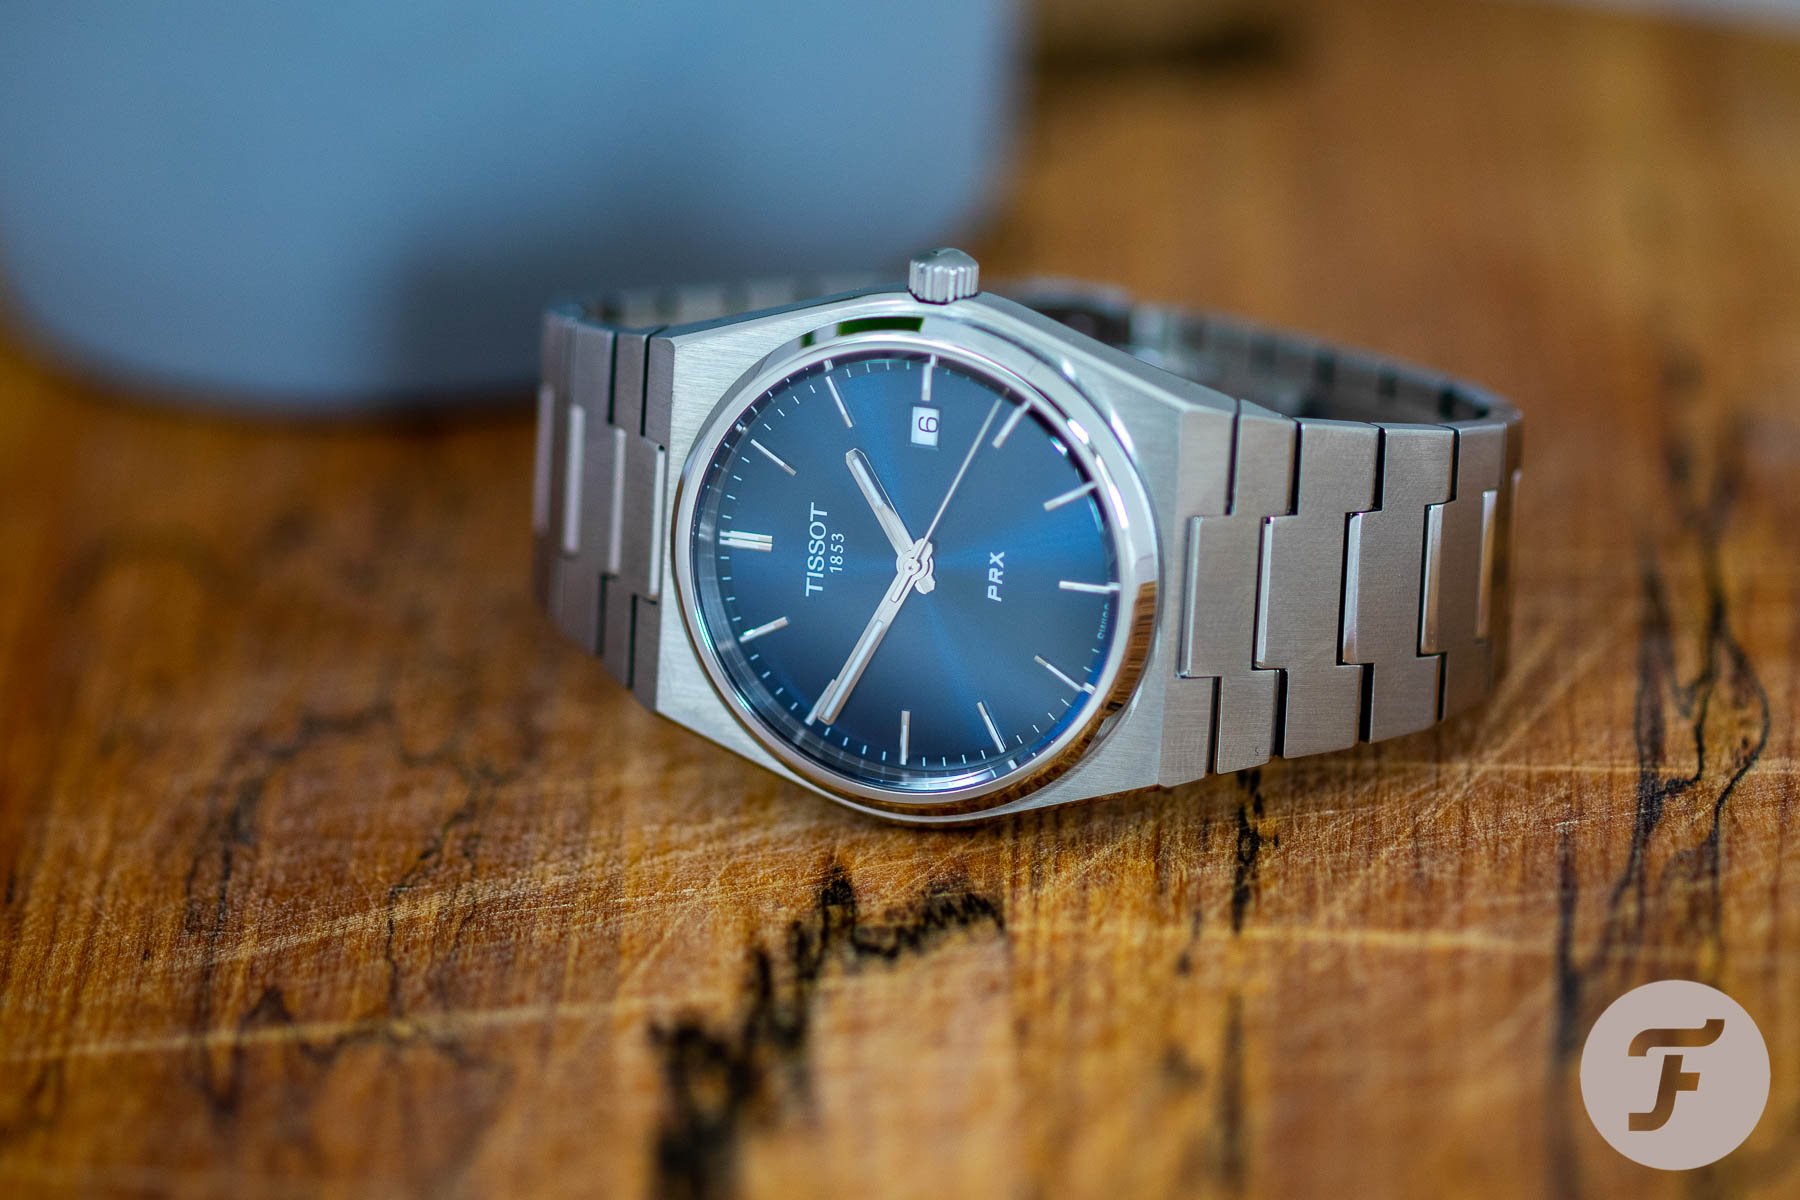 Hands-On Review: The Tissot PRX Has Convinced Me